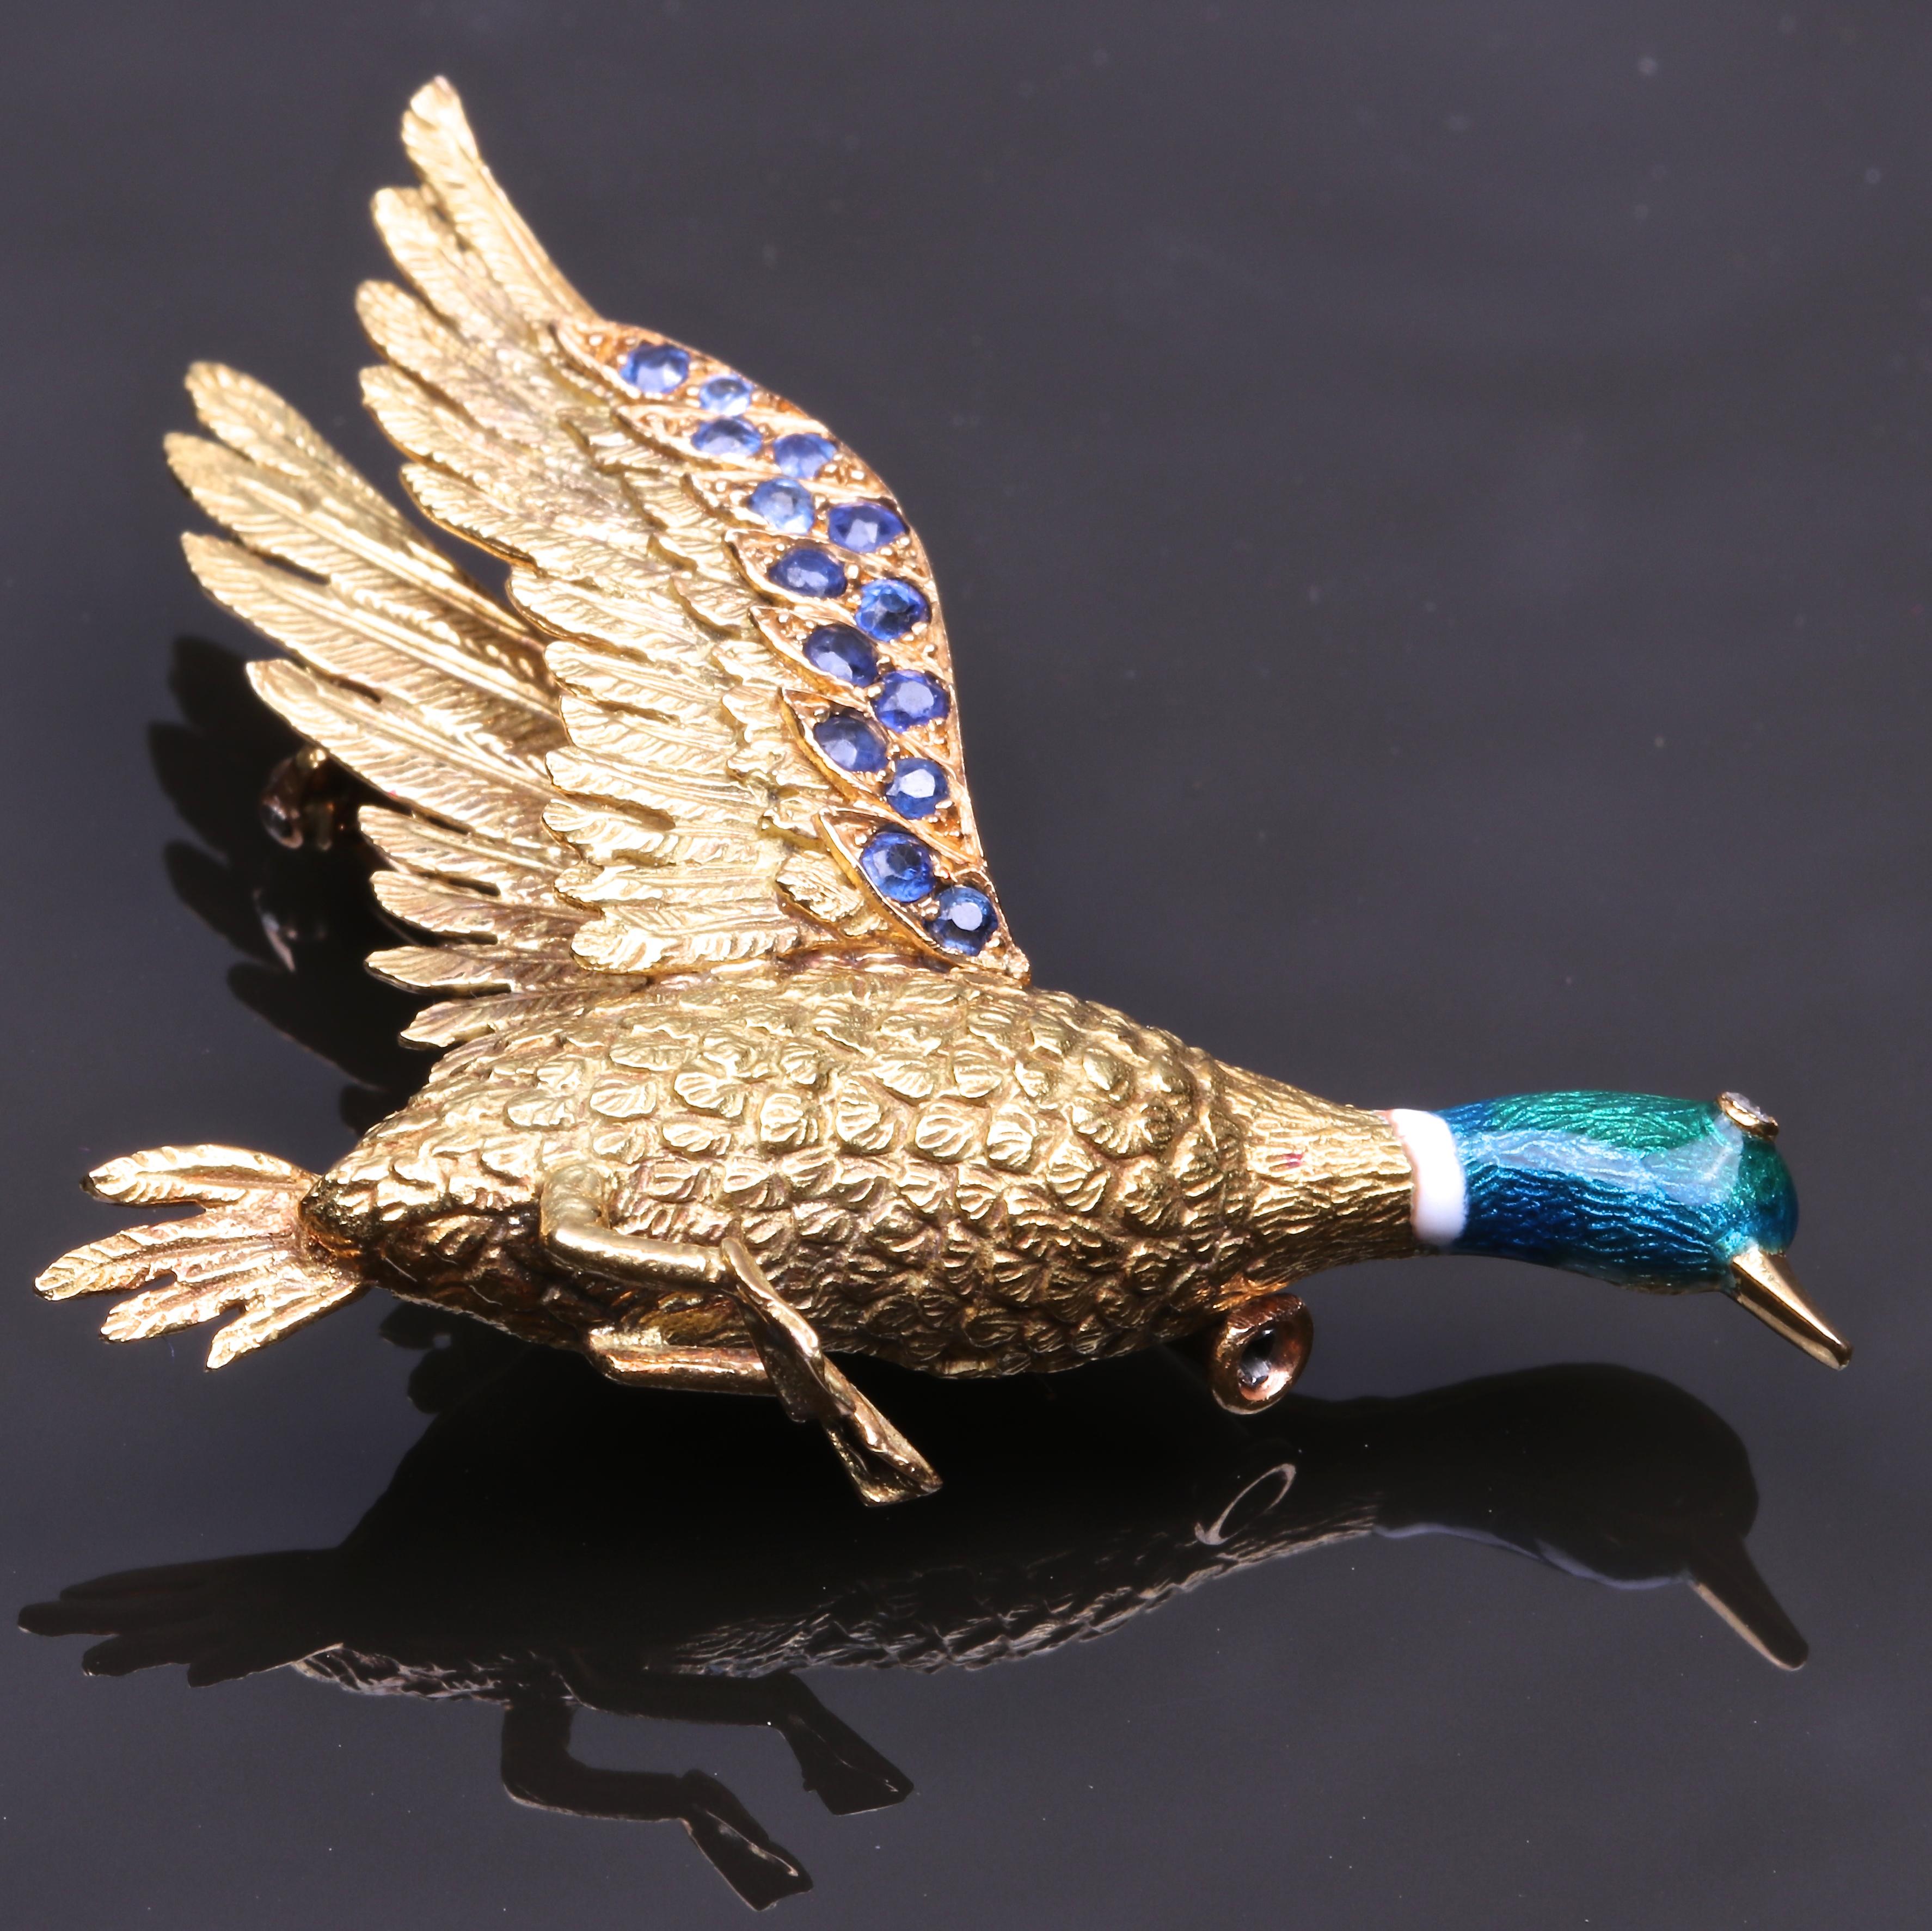 The duck seems to be in full flight while resting on your lapel, a dynamic combination of stillness and movement. This Mellerio brooch features diamonds, sapphires, enamel and is made in 18k gold. There are 14 sapphires weighing approximately 0.45